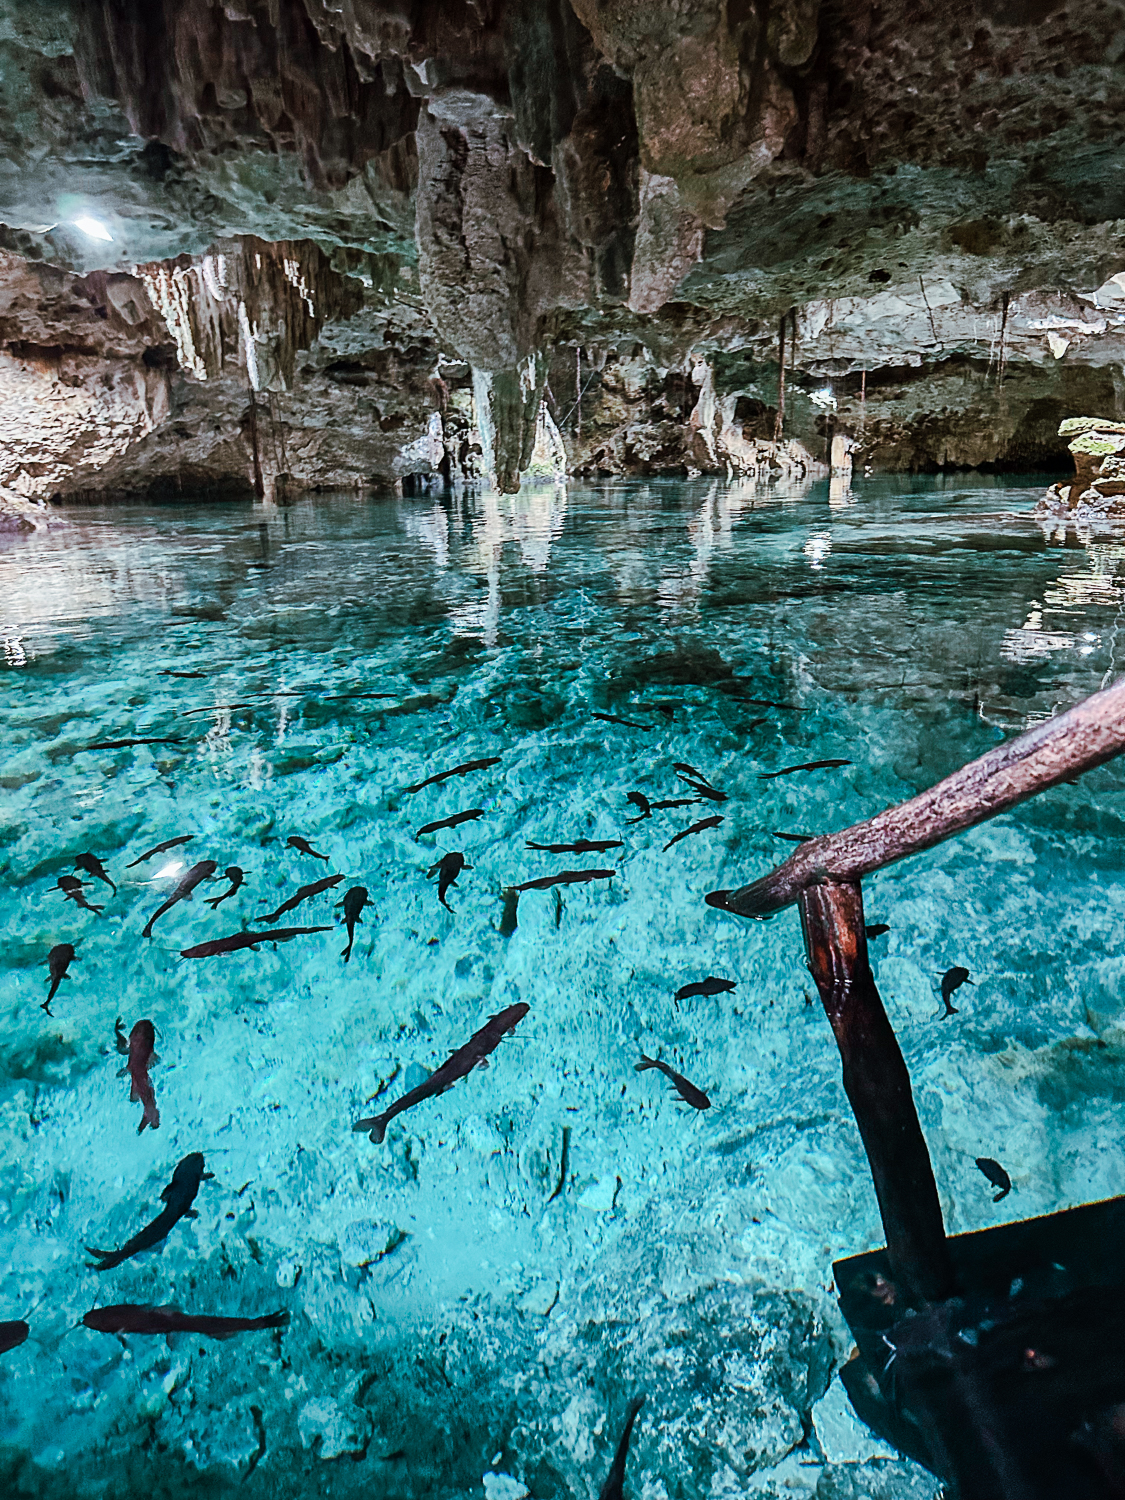 Pacific Globetrotters, budget family travel blog, shares the Best Cenotes In Cancun. Aktun-Chen